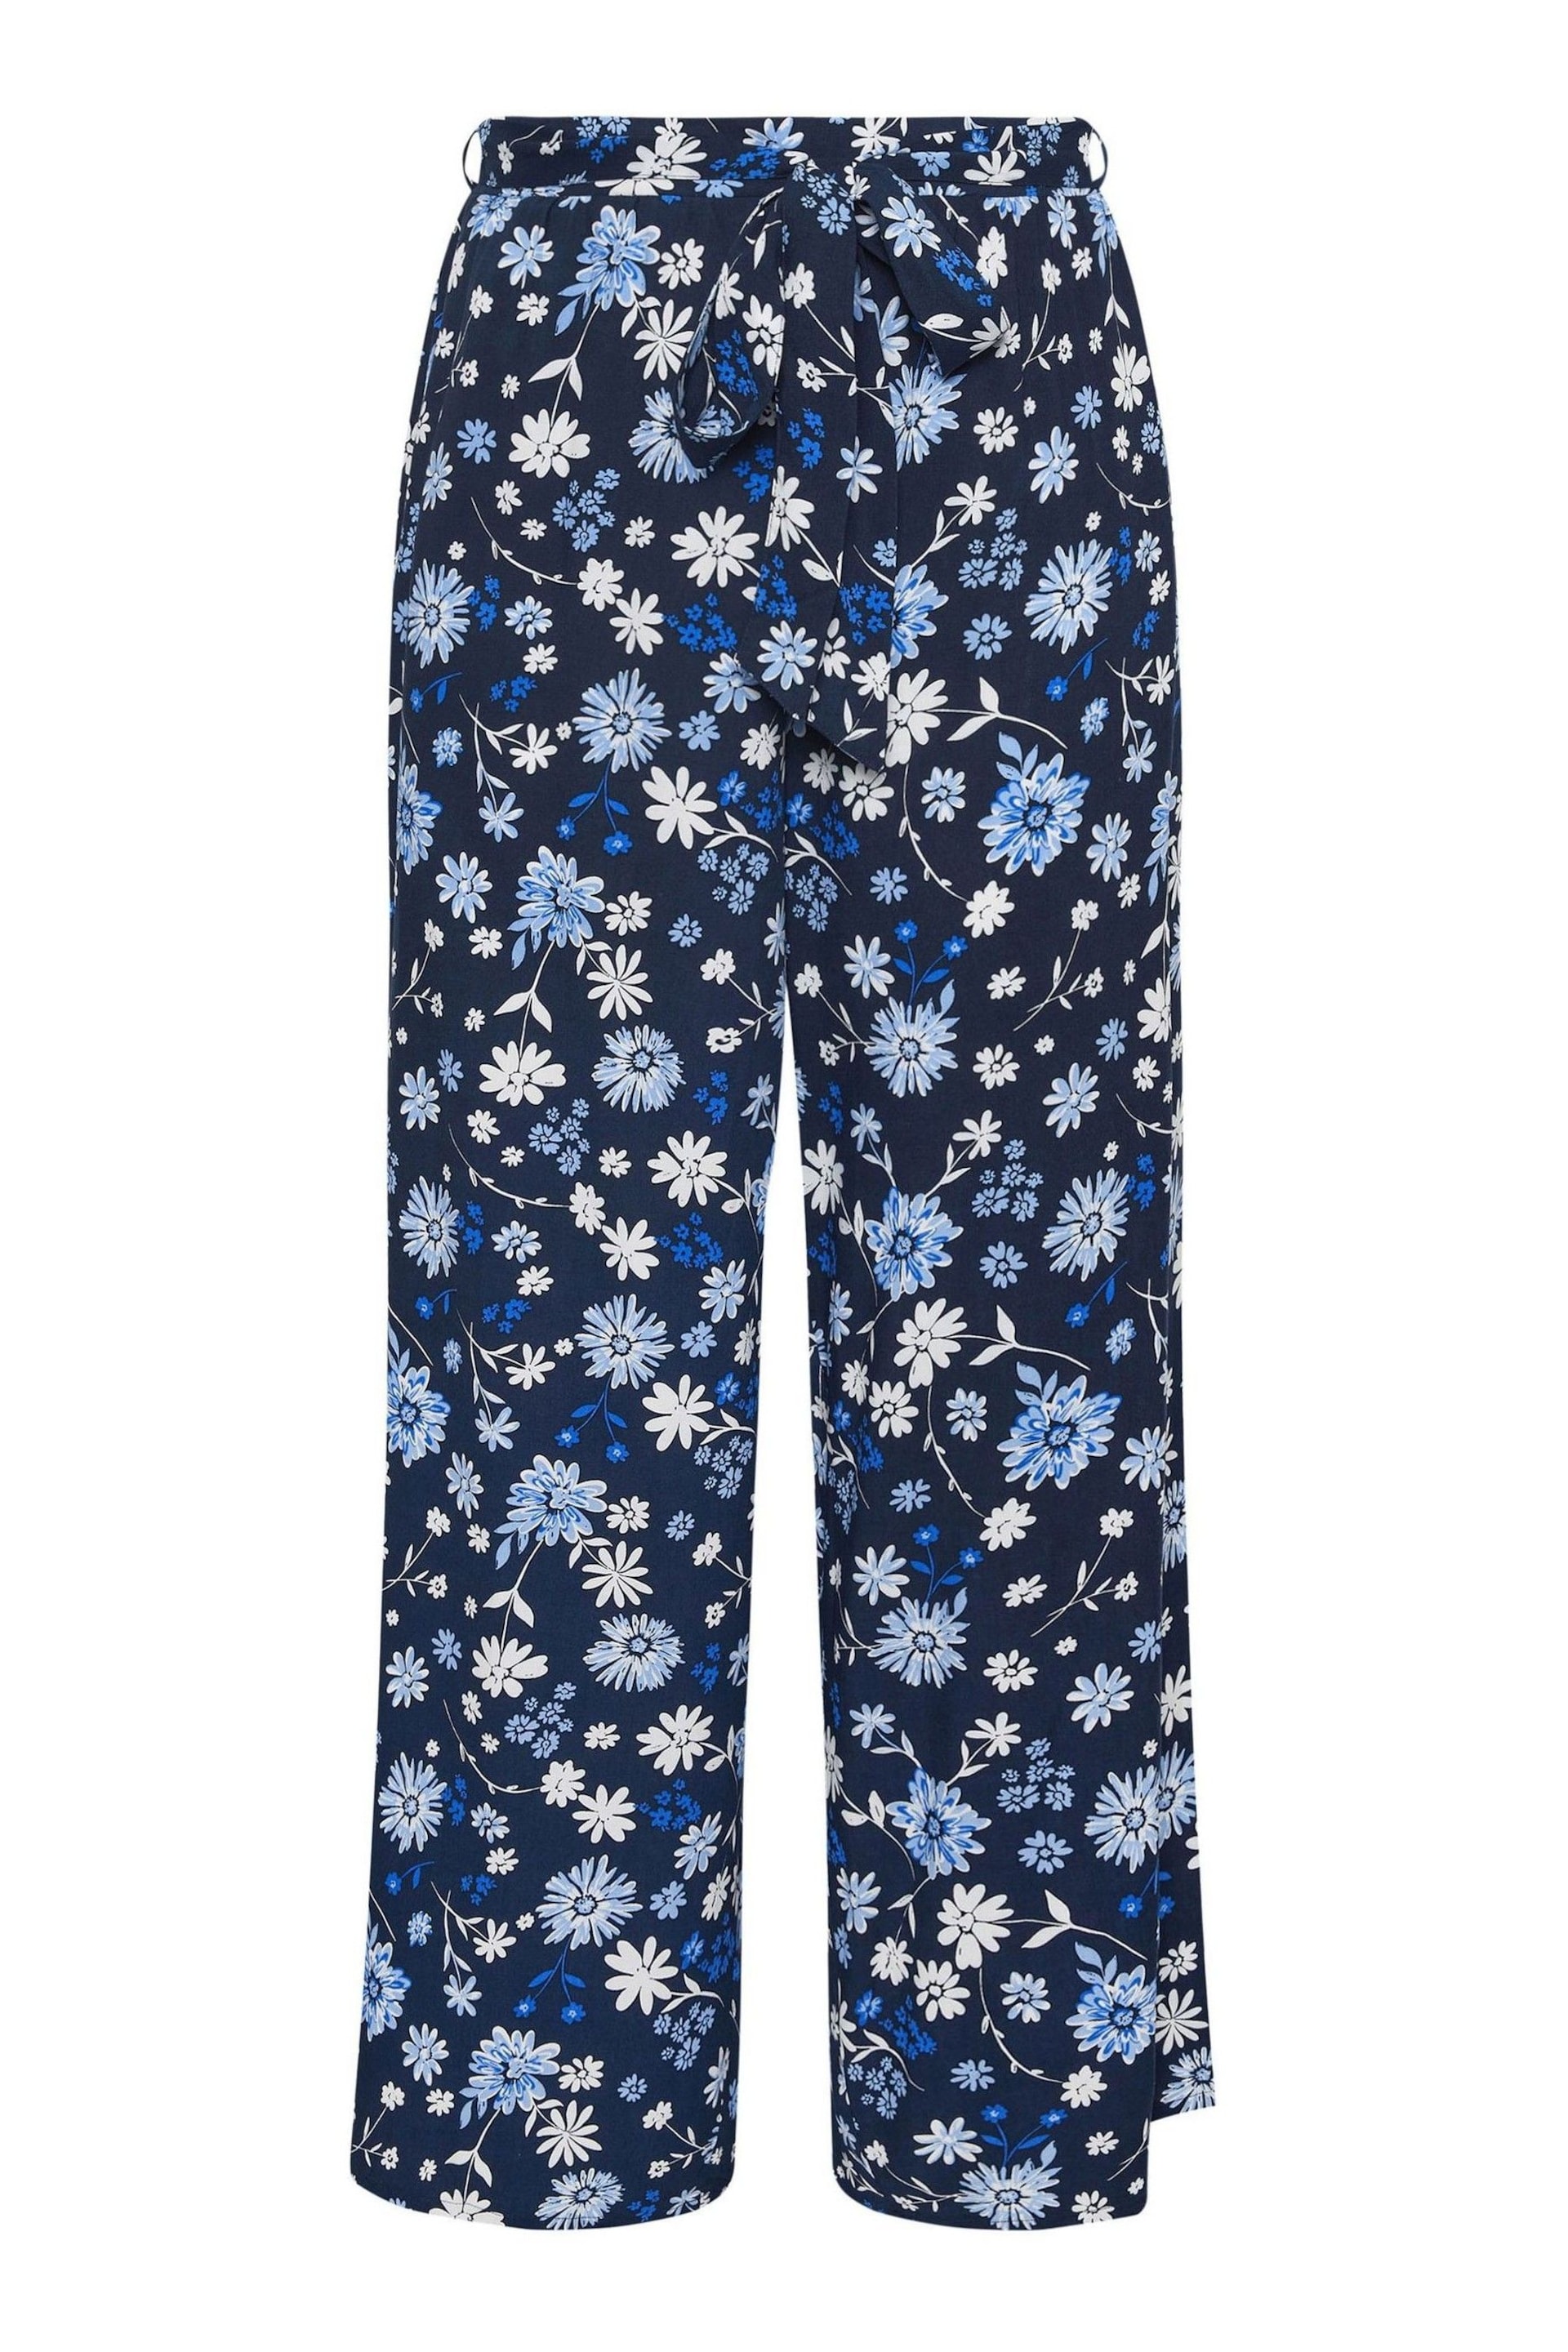 Yours Curve Blue Floral Print Shirred Wide Leg Trousers - Image 5 of 5